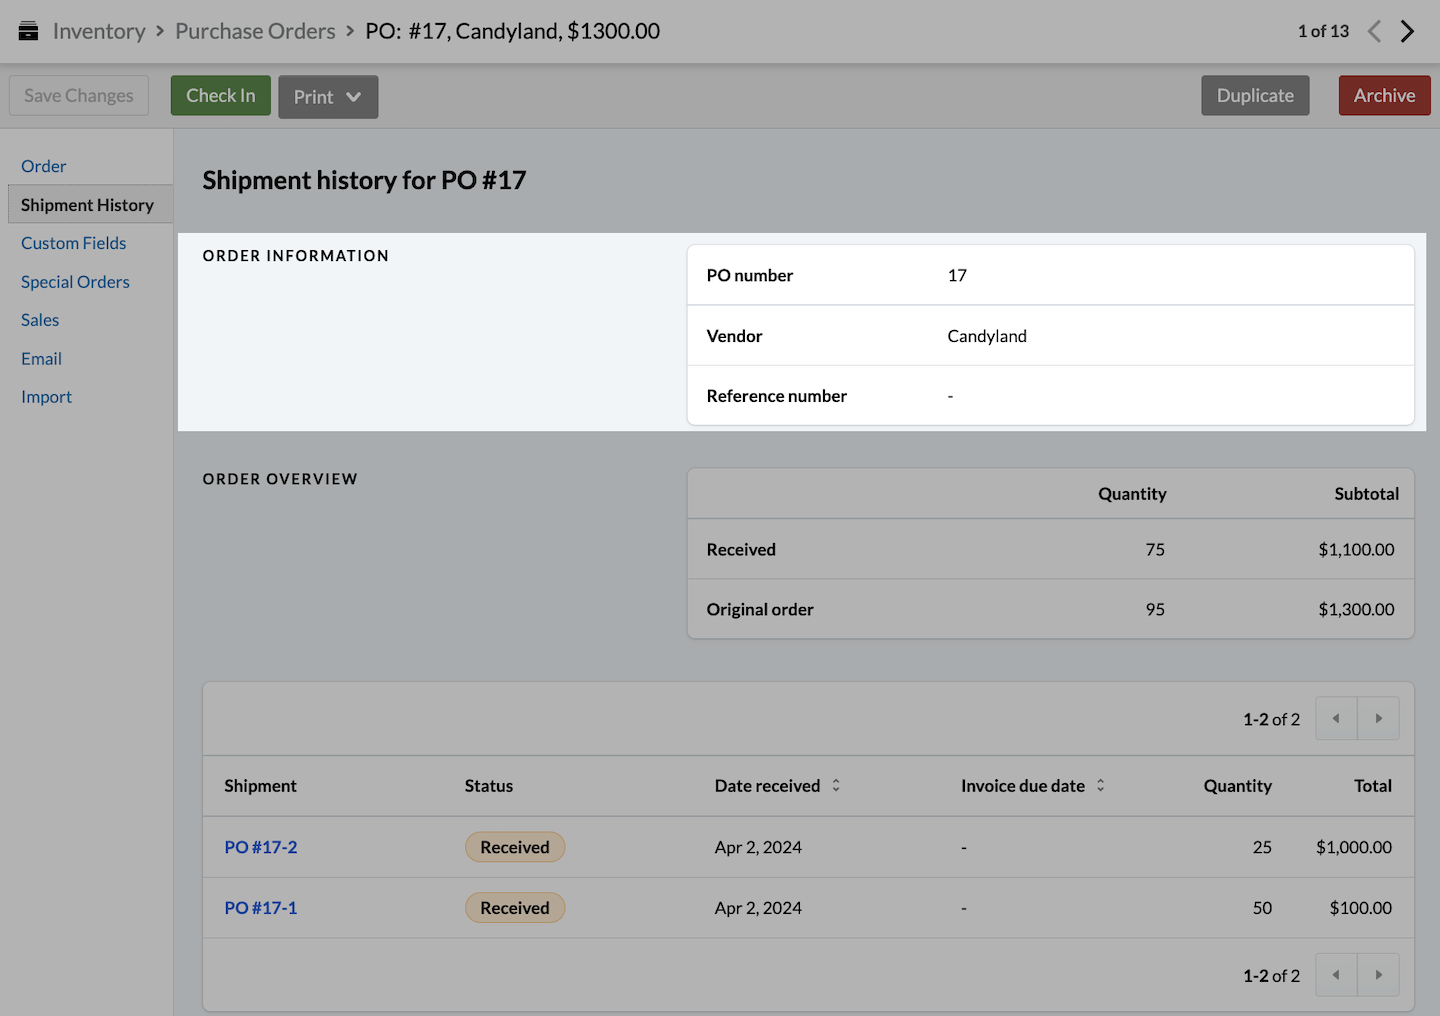 Shipment history page, with Order Information section emphasized.